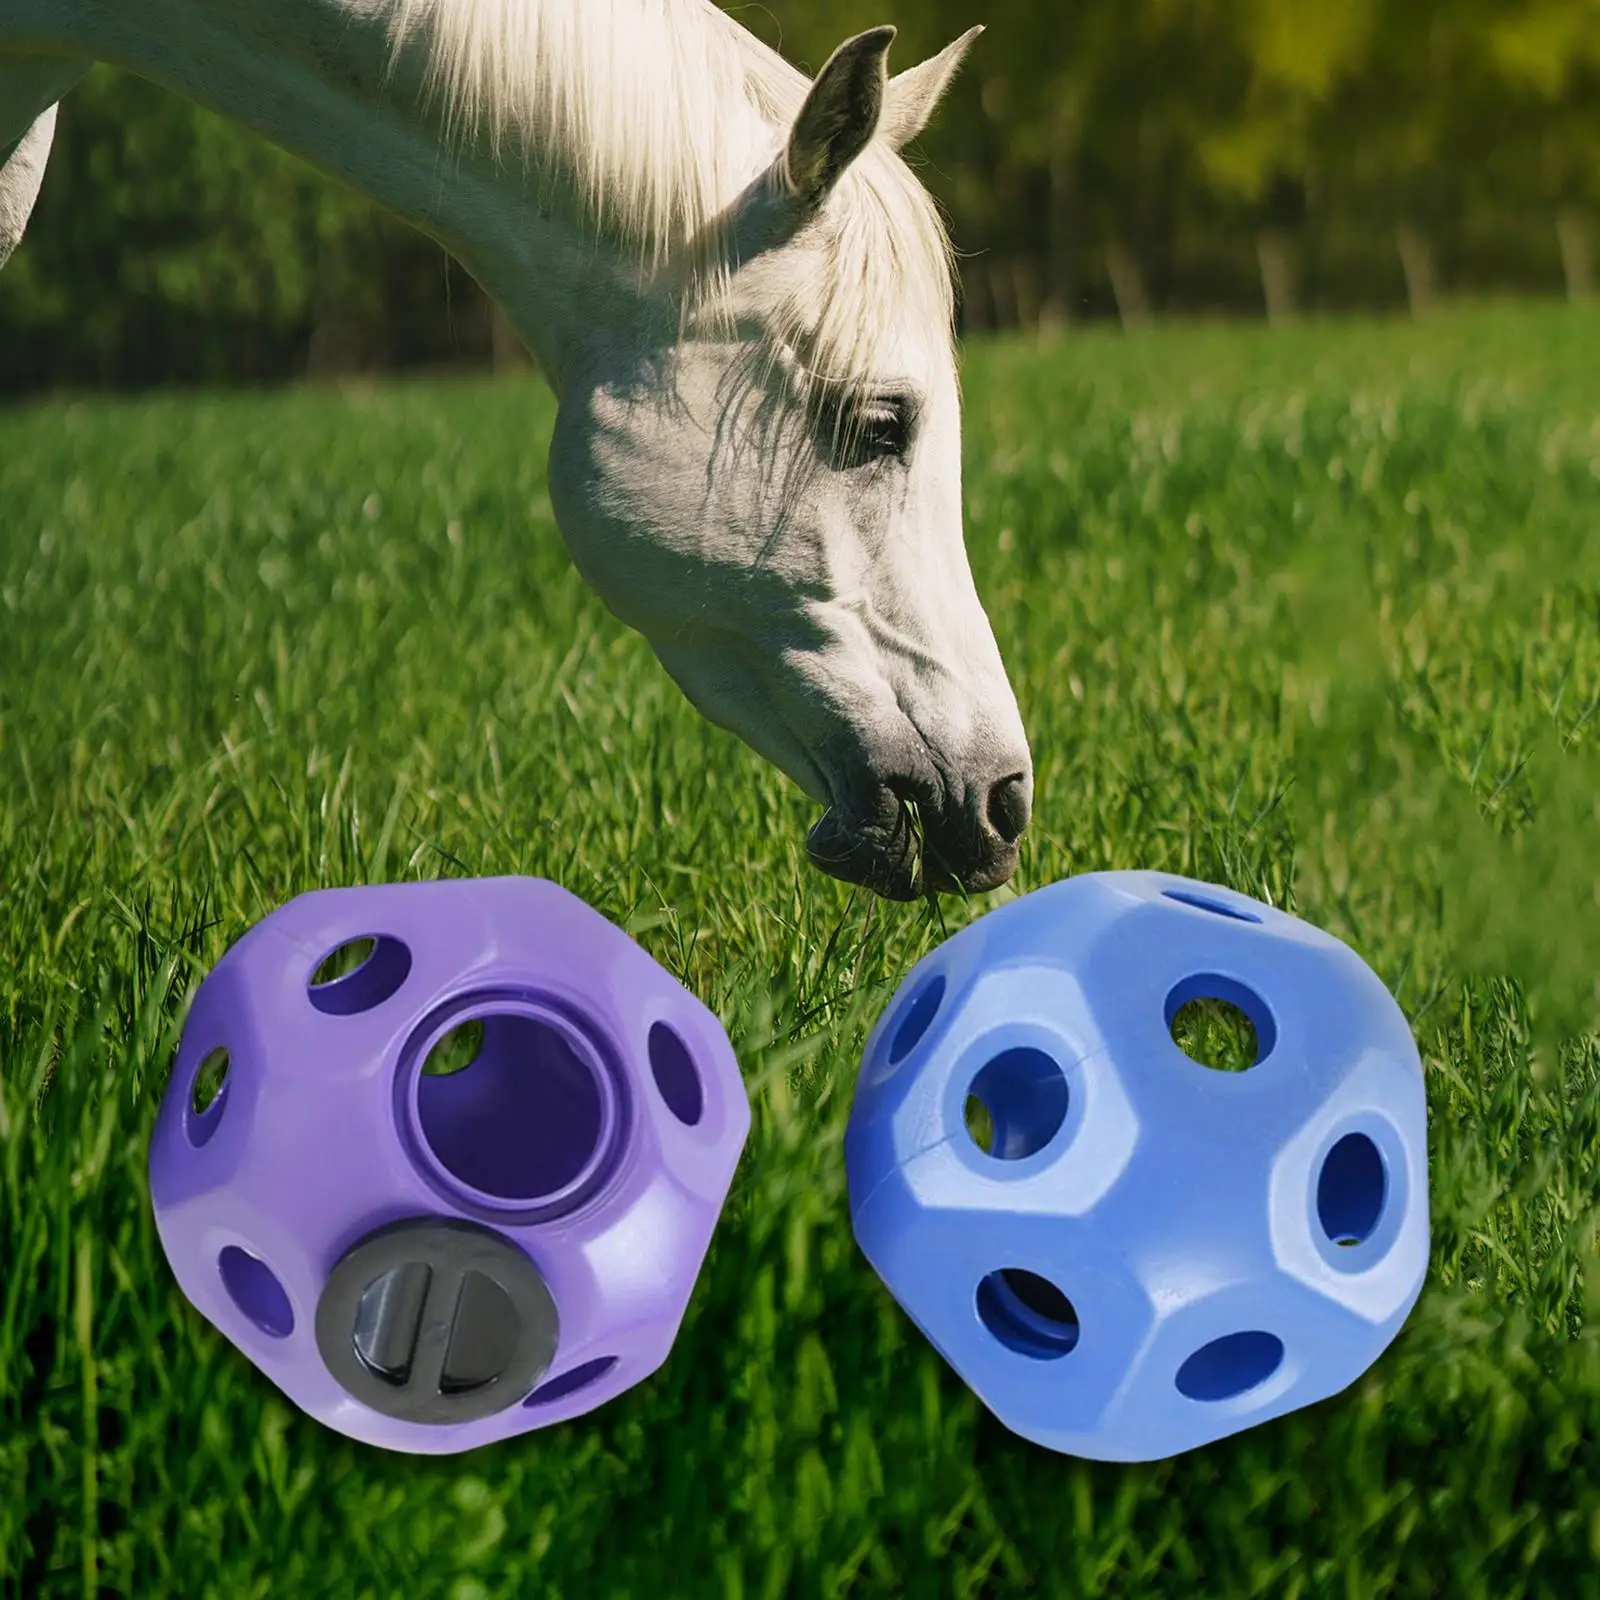 Fun Horse Treat Ball Multipurpose Feed Ball Horse Hay Ball Feeding Toy Hollow Hay Feeder Toy Ball for Horse Stable Stall